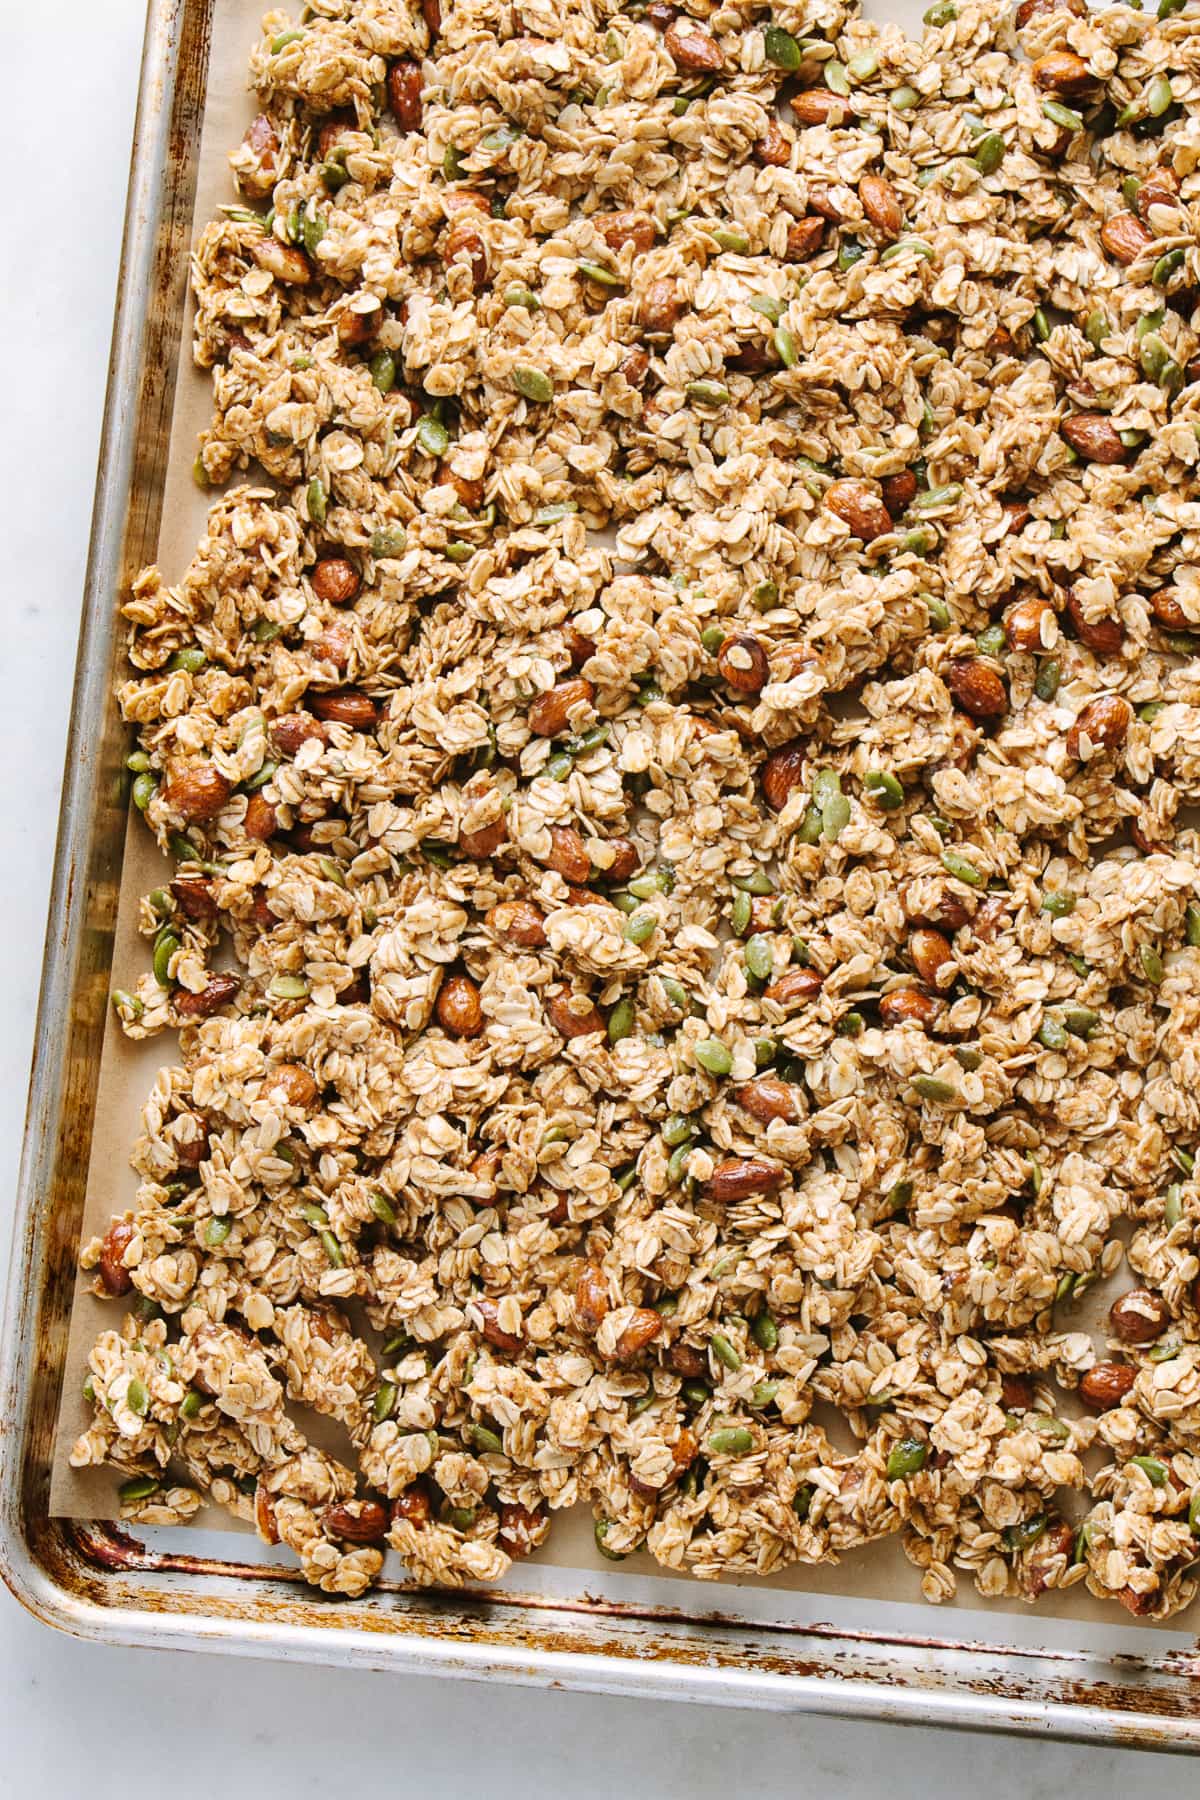 top down view of wet granola spread evenly on a rimmed baking sheet before baking.